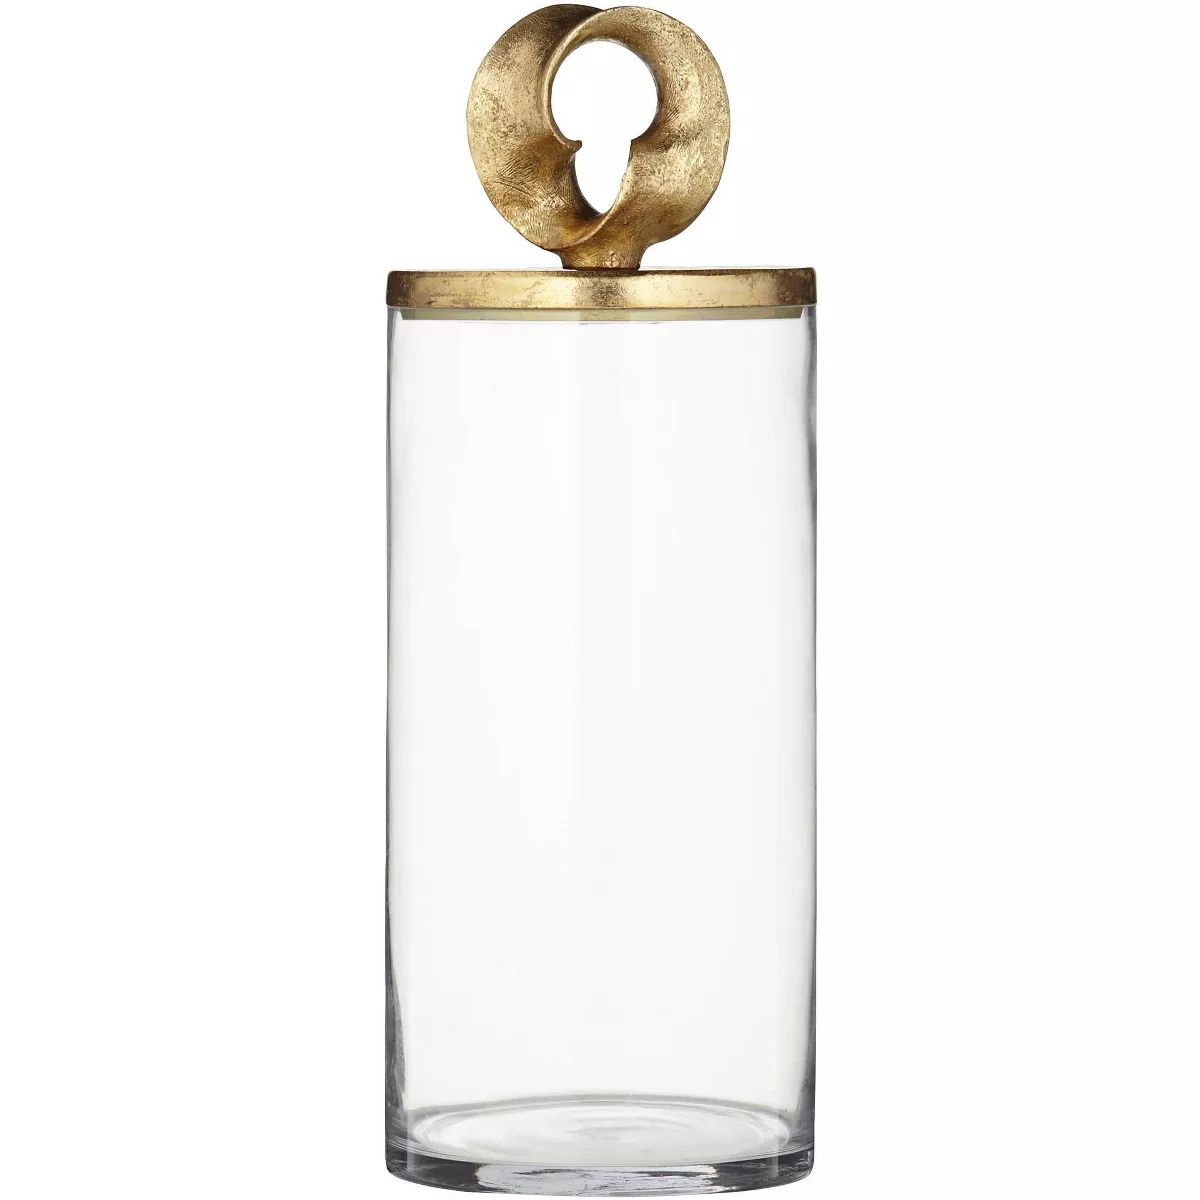 Studio 55D Fleur 16" High Shiny Gold and Clear Glass Jar with Lid | Target